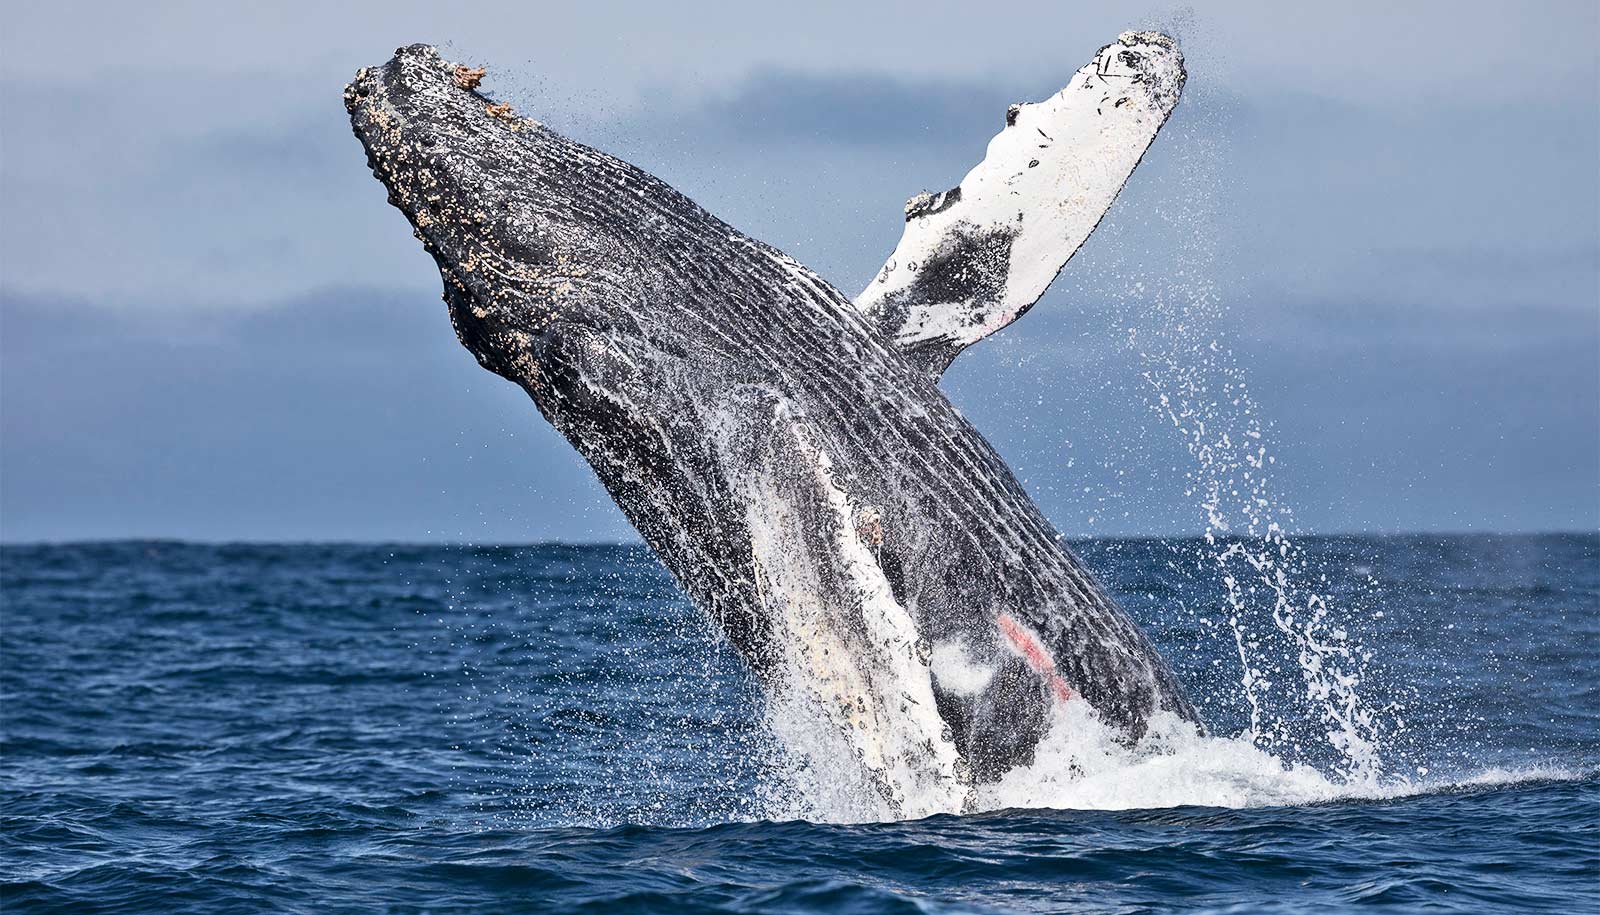 Less fishing gear could save more humpback whales - Futurity